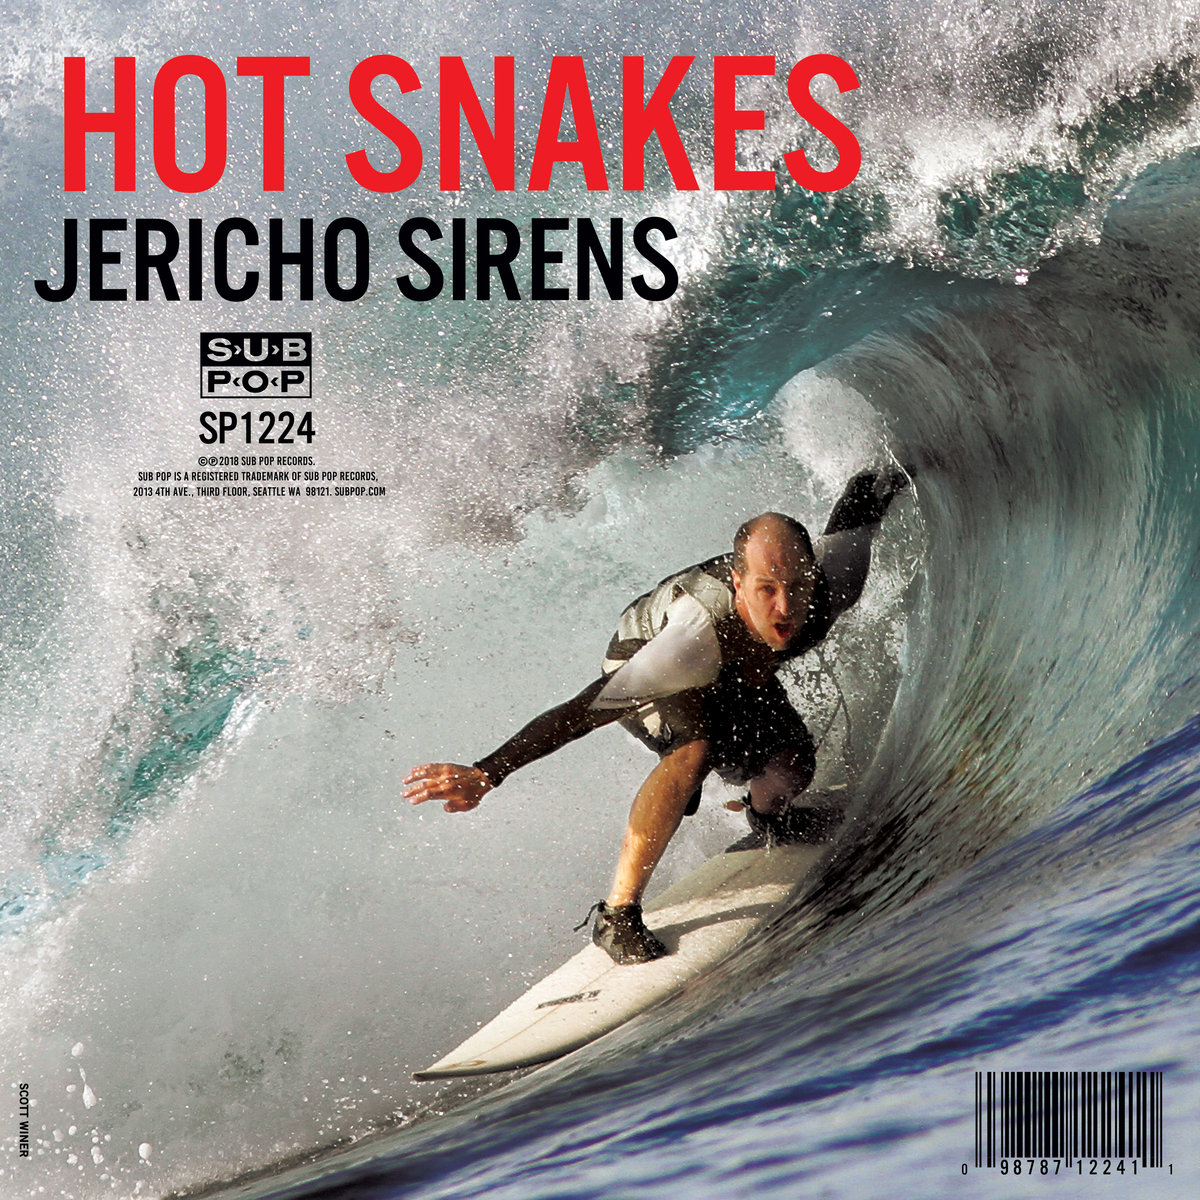 Northern Transmissions review of 'Jericho Sirens' by Hot Snakes